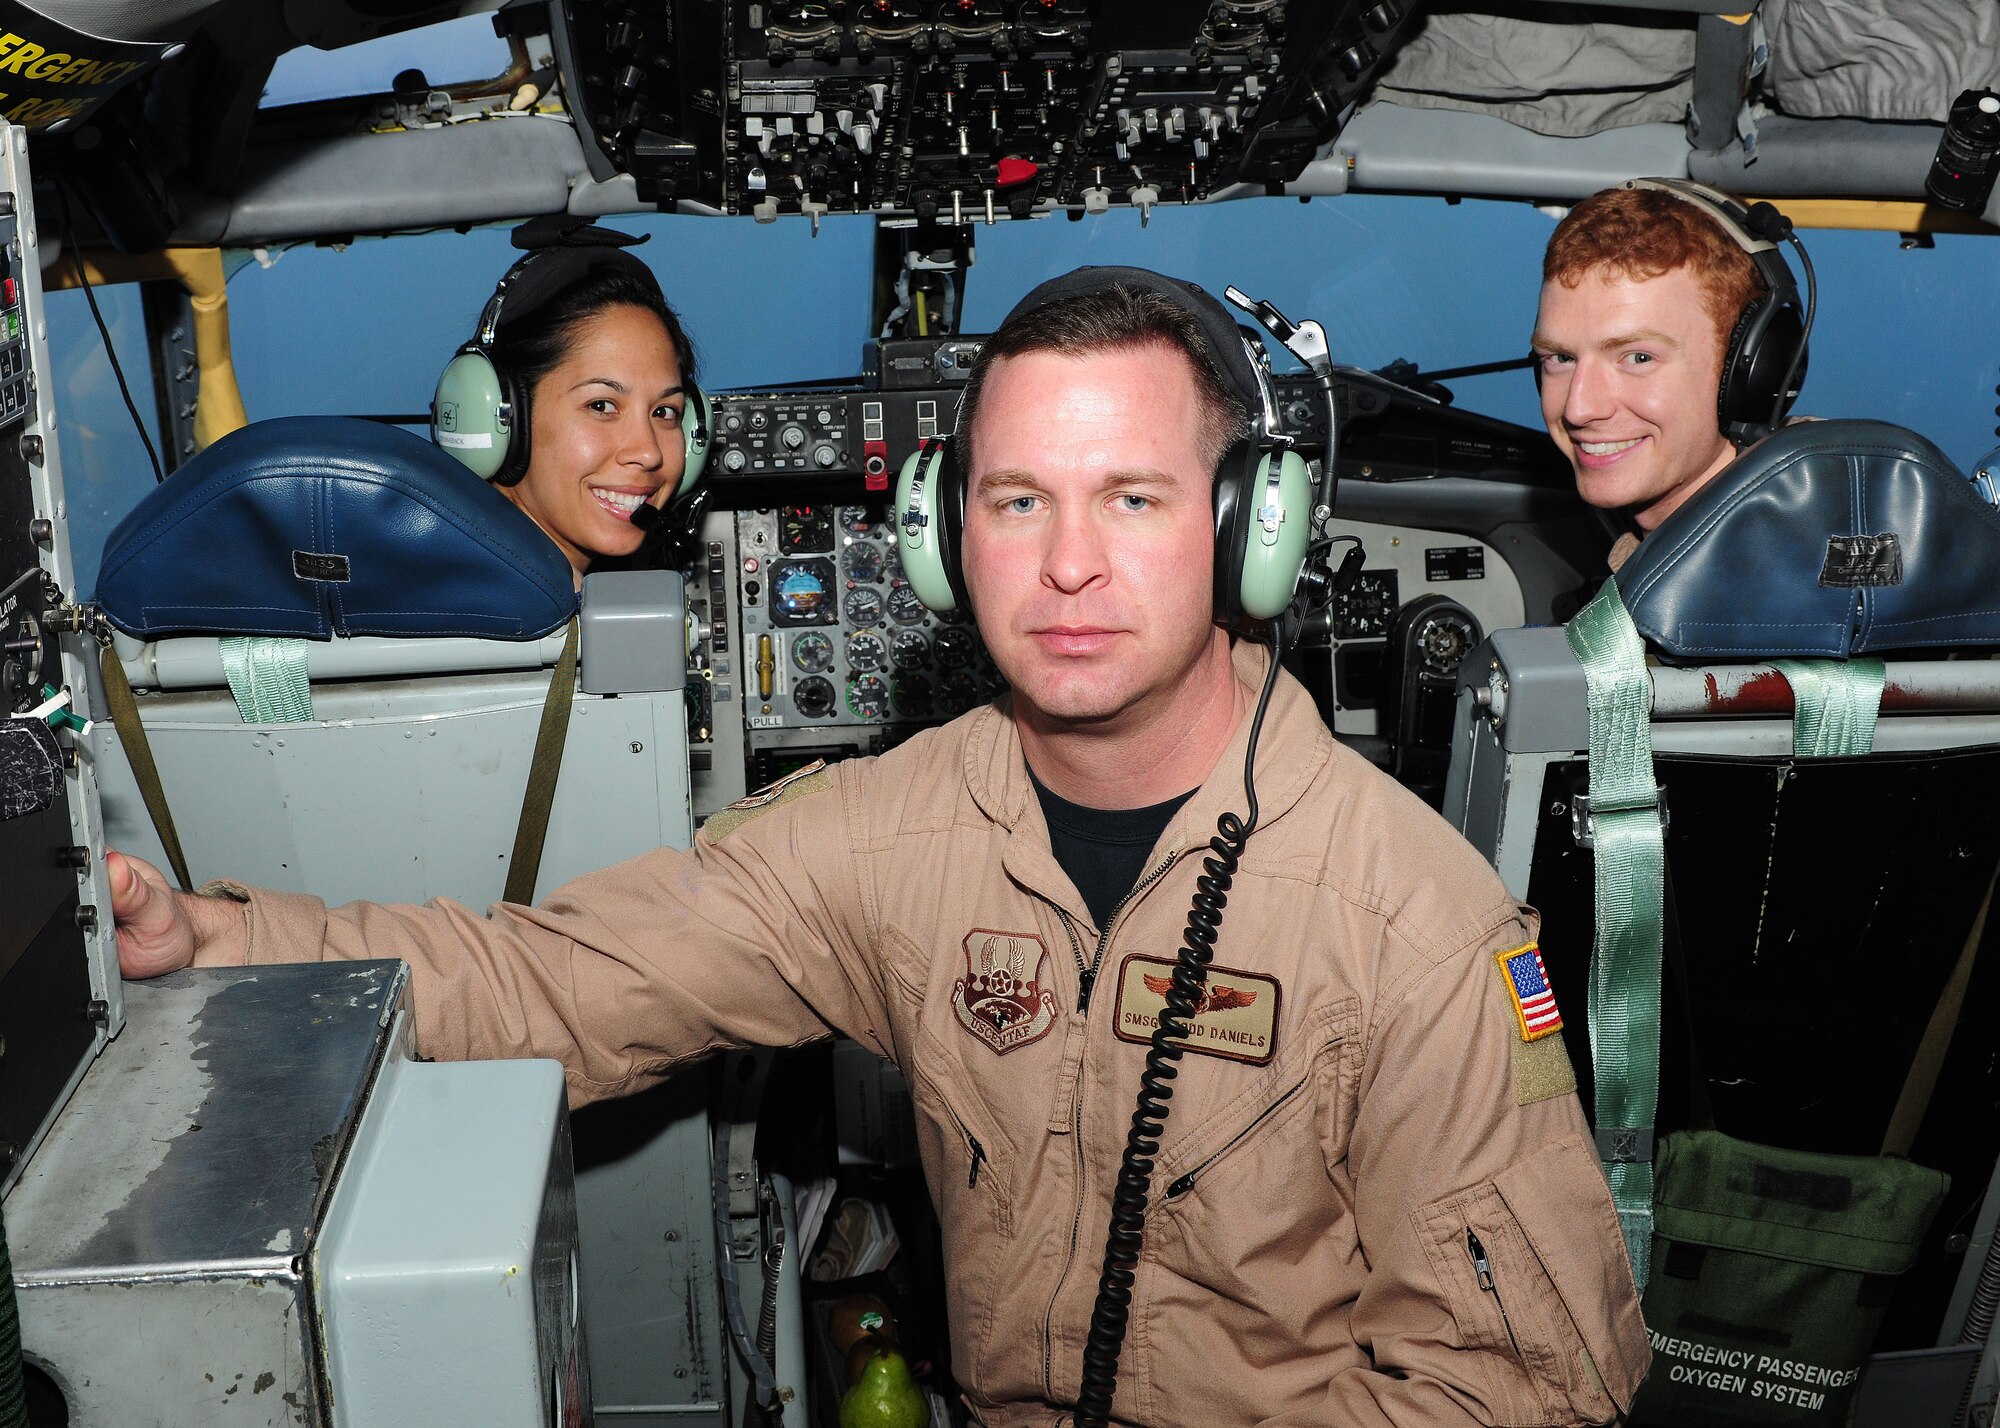 U.S. Air Force Capt. Christine Stanaback, Senior Master Sgt. Todd Daniels, and Capt. Mike Castlen, 22nd Expeditionary Air Refueling Squadron air crew, successfully flew the unit’s 16,000th sortie April 10, 2010. This 16,000th sortie is a culmination of monumental efforts, not just by air crews and maintainers, but the whole team at the Transit Center at Manas, Kyrgyzstan. (U.S. Air Force photo/Senior Airman Nichelle Anderson/released)